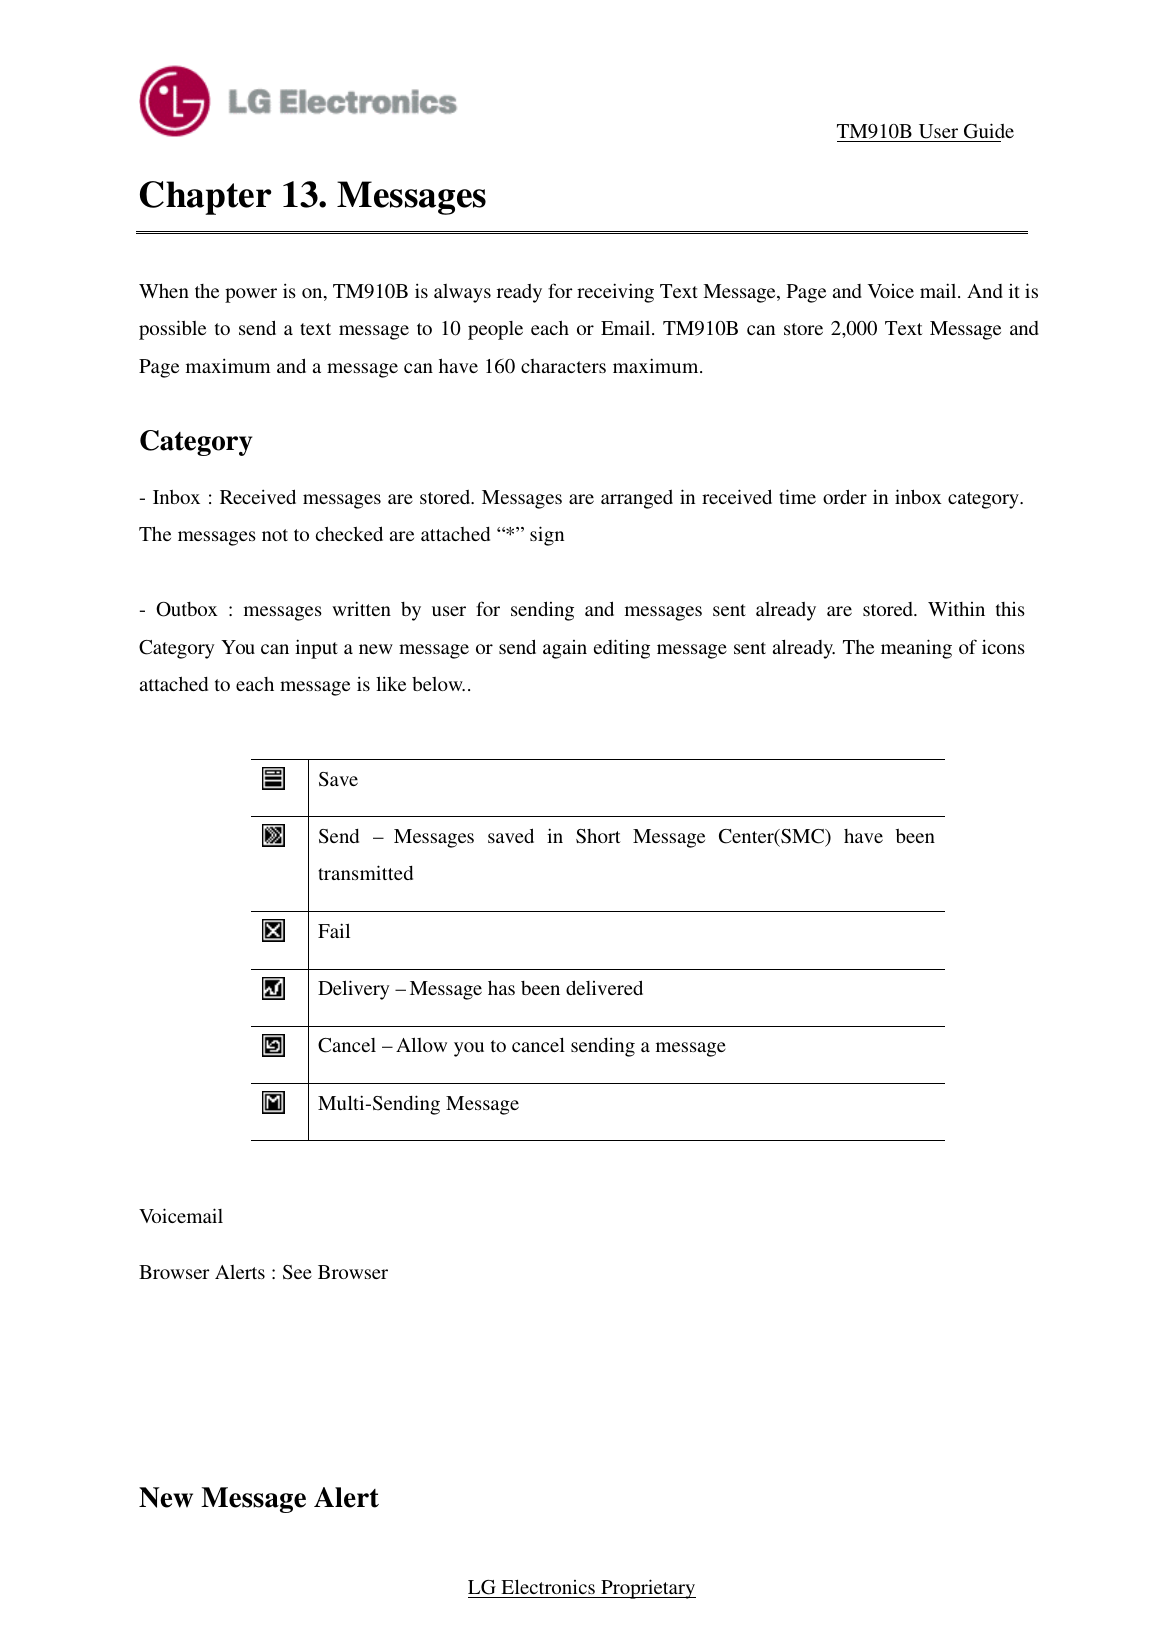                                      TM910B User Guide LG Electronics Proprietary Chapter 13. Messages When the power is on, TM910B is always ready for receiving Text Message, Page and Voice mail. And it is possible to send a text message to 10 people each or Email. TM910B can store 2,000 Text Message and Page maximum and a message can have 160 characters maximum.  Category - Inbox : Received messages are stored. Messages are arranged in received time order in inbox category. The messages not to checked are attached “*” sign  - Outbox : messages written by user for sending and messages sent already are stored. Within this Category You can input a new message or send again editing message sent already. The meaning of icons attached to each message is like below..   Save  Send – Messages saved in Short Message Center(SMC) have been transmitted  Fail  Delivery – Message has been delivered  Cancel – Allow you to cancel sending a message  Multi-Sending Message  Voicemail Browser Alerts : See Browser     New Message Alert 